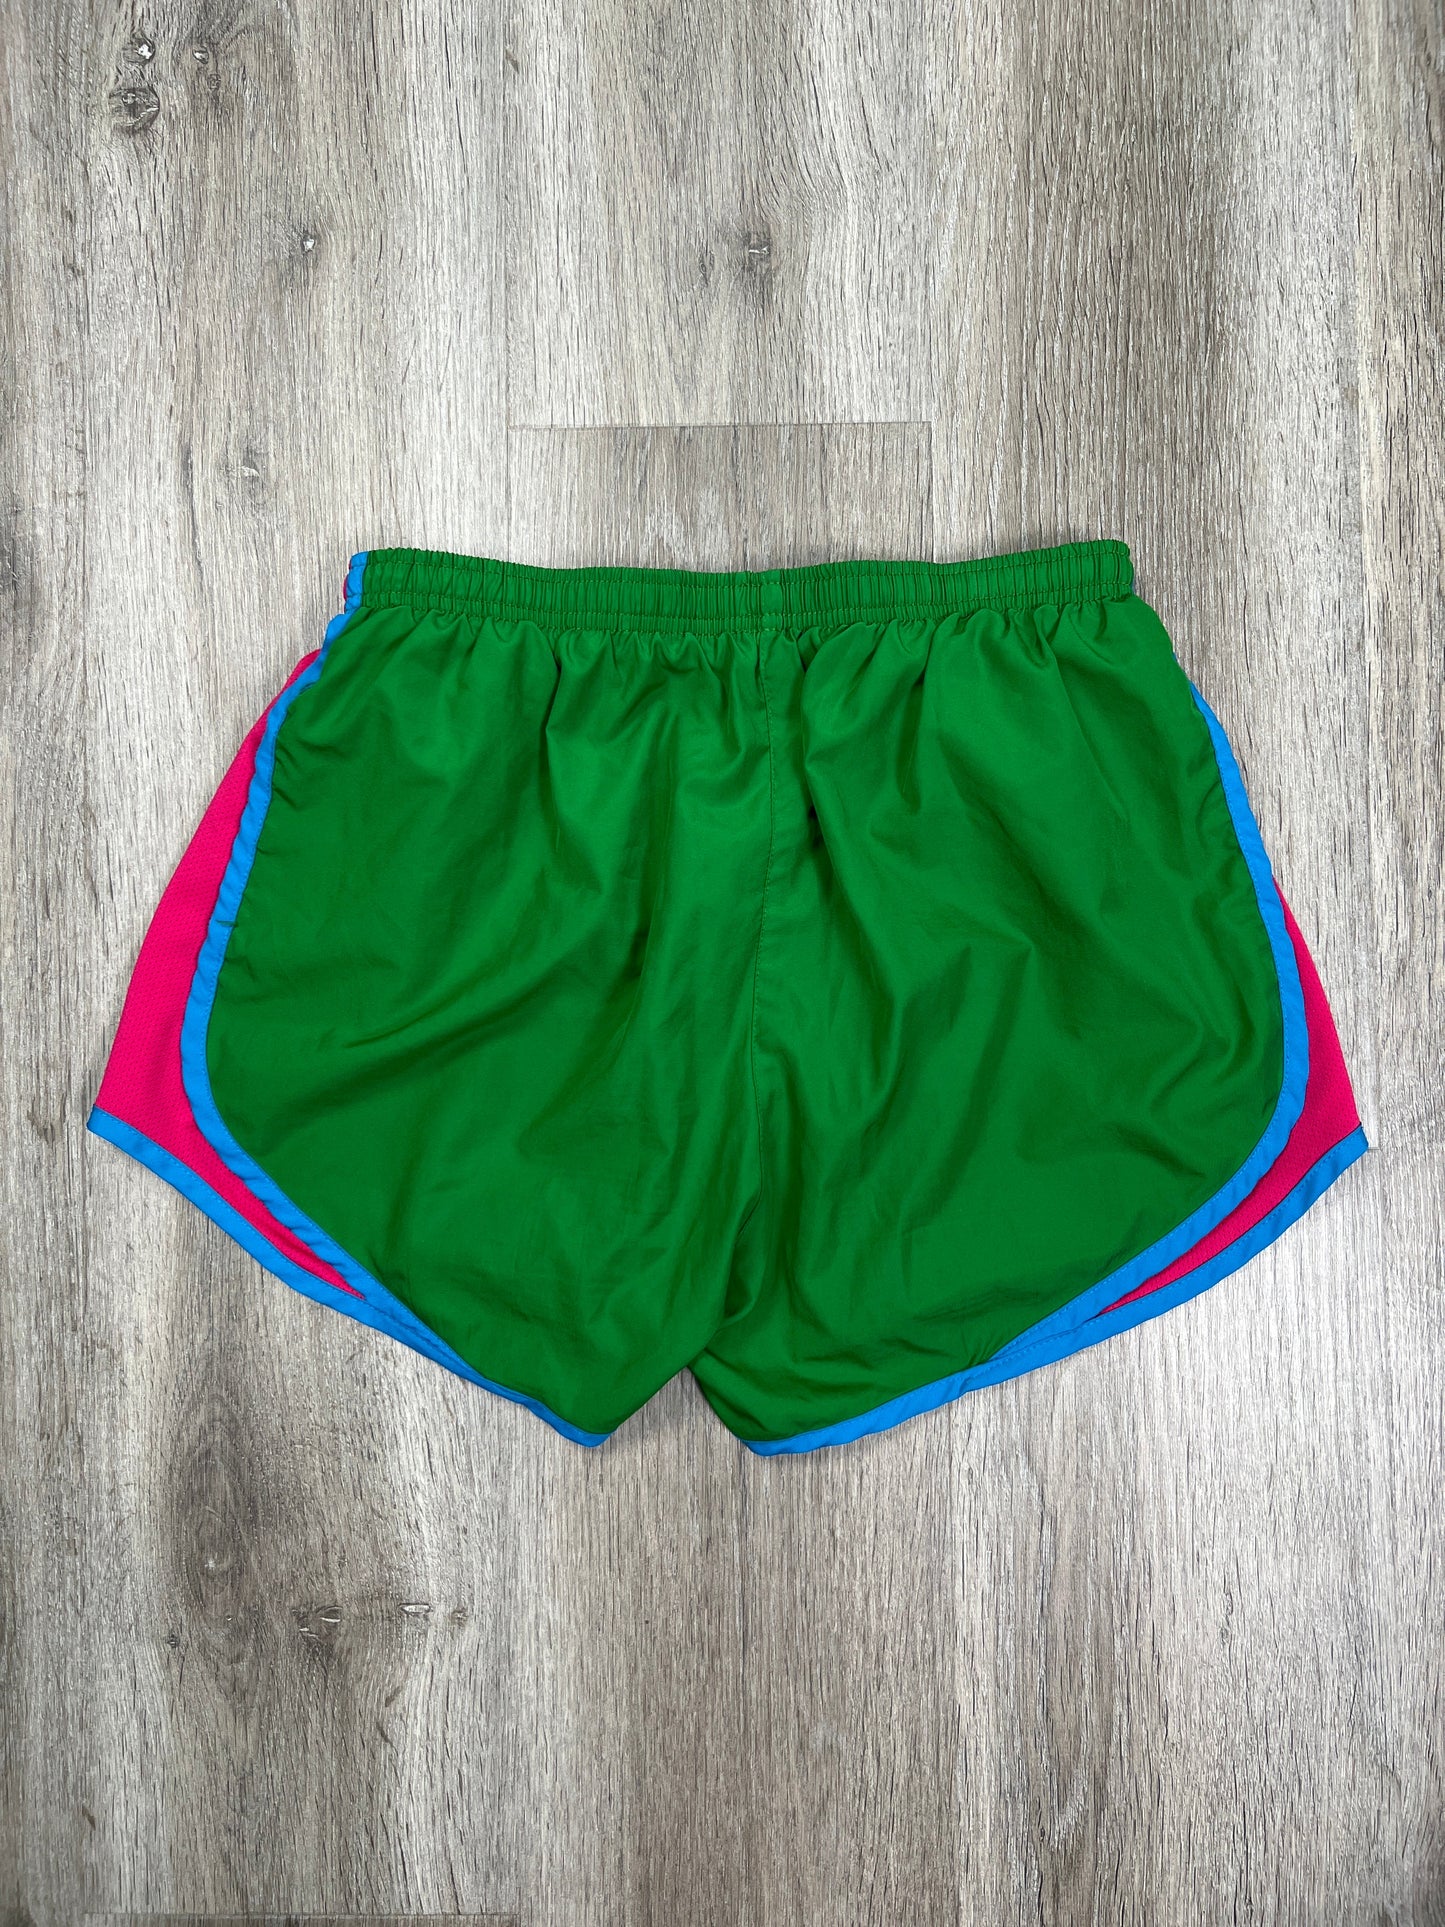 Green & Pink Athletic Shorts Nike Apparel, Size M